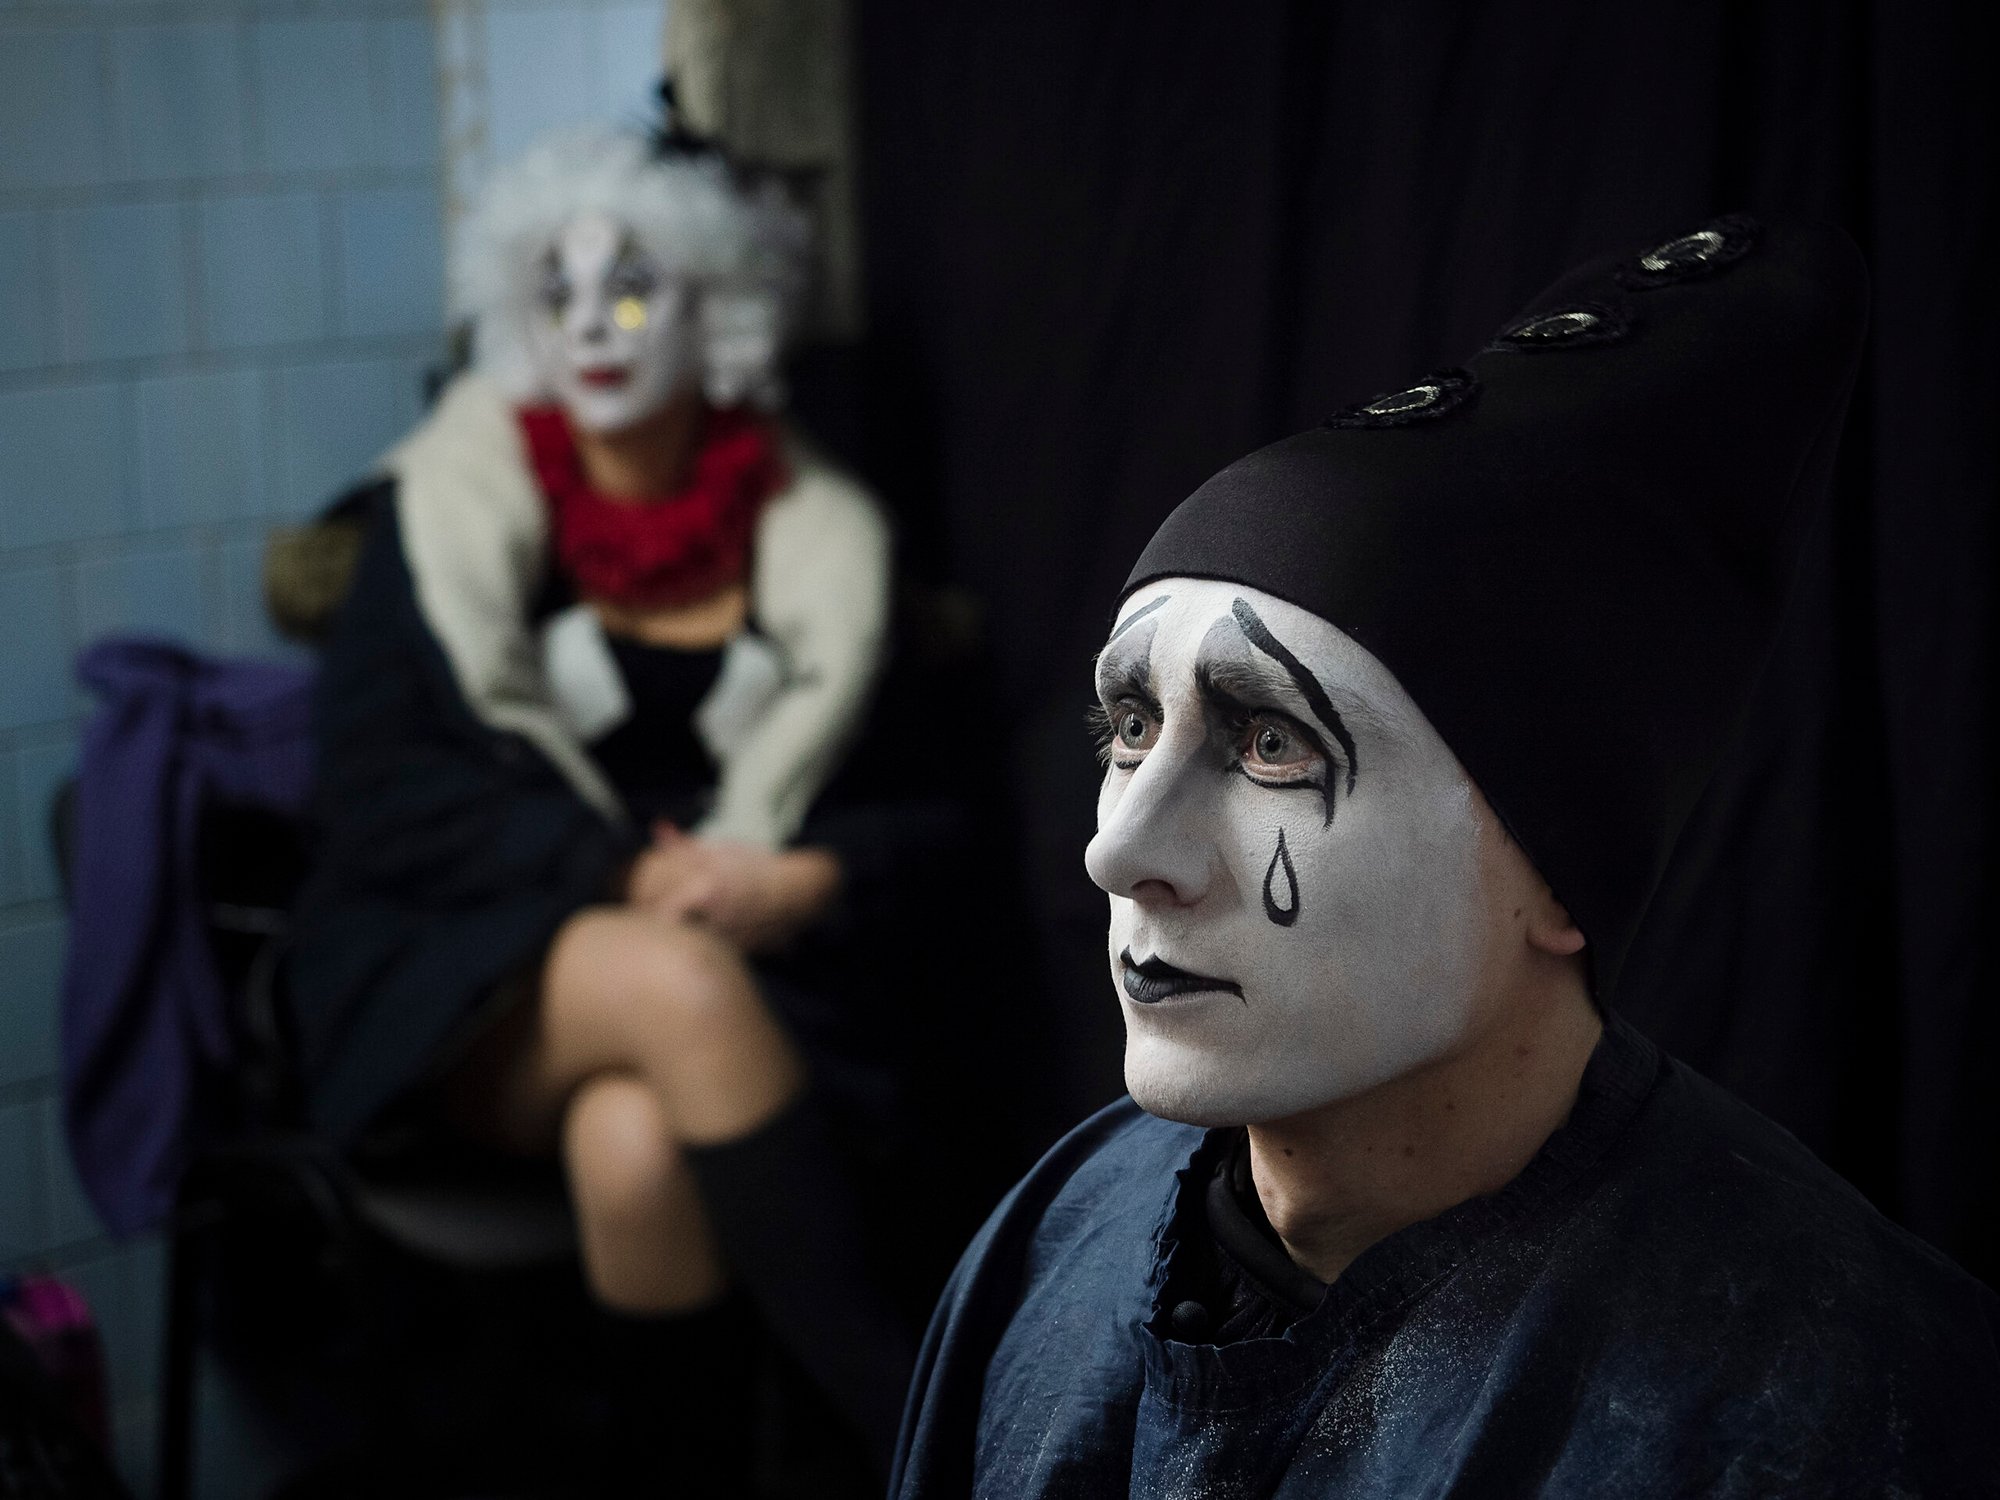 Backstage at the National Oleksandr Dovzhenko Film Centre, actors Dmytro Olyinkyk and Khrysina Synelnik are preparing for the premiere of 'Numbers,' directed remotely by imprisoned filmmaker Oleh Sentsov.